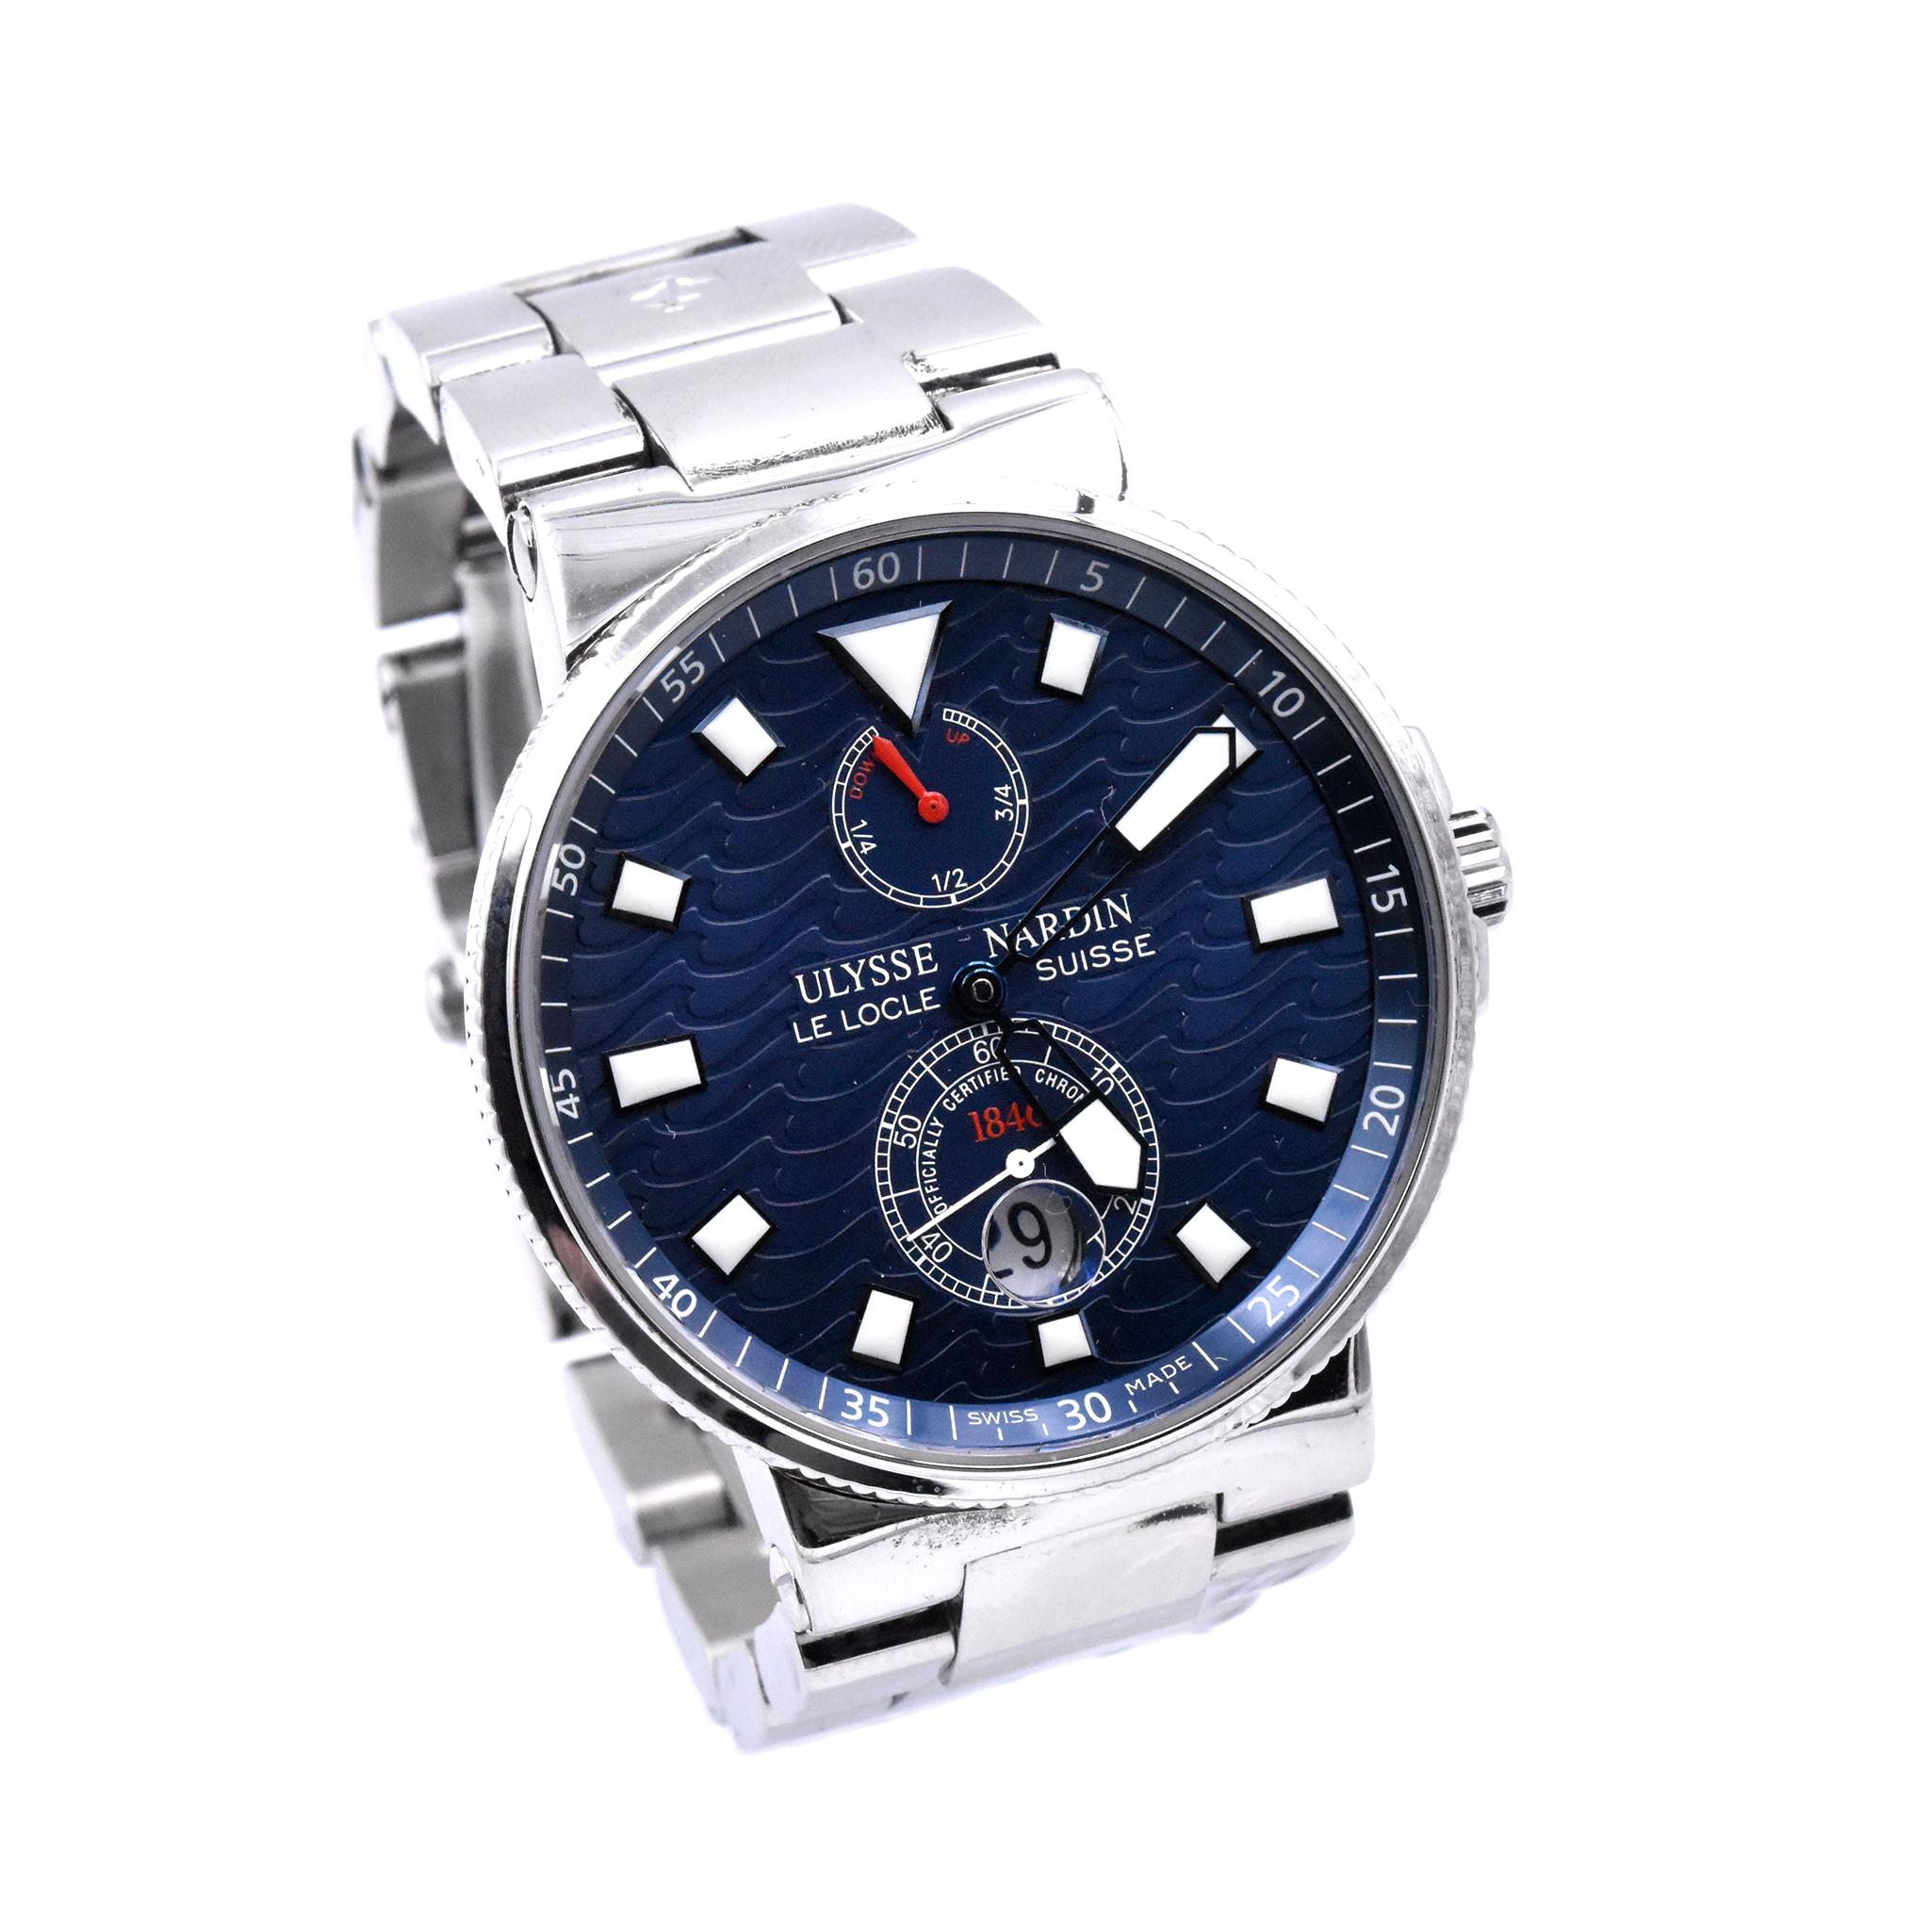 Movement: automatic
Function: hours, minutes, small seconds, date, water resistant to 100m
Case: 41mm stainless steel case, sapphire crystal, screw down crown
Band: stainless steel bracelet, will fit a 7” wrist 
Dial: blue wave dial, luminescent